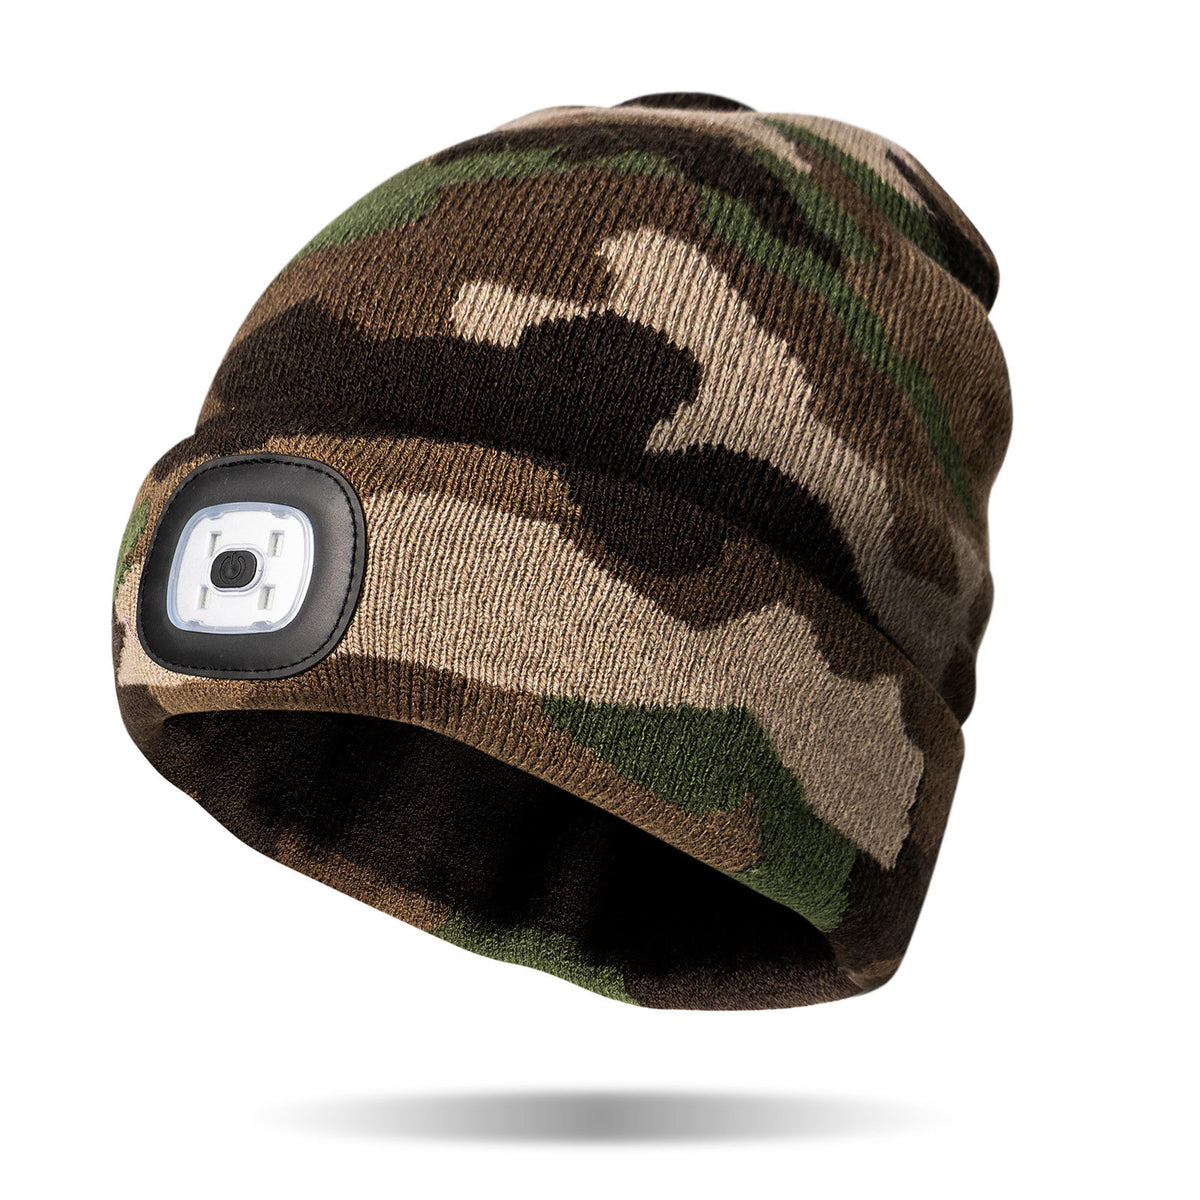 Night Scope Explorer&#39;s Collection LED Beanie Hat